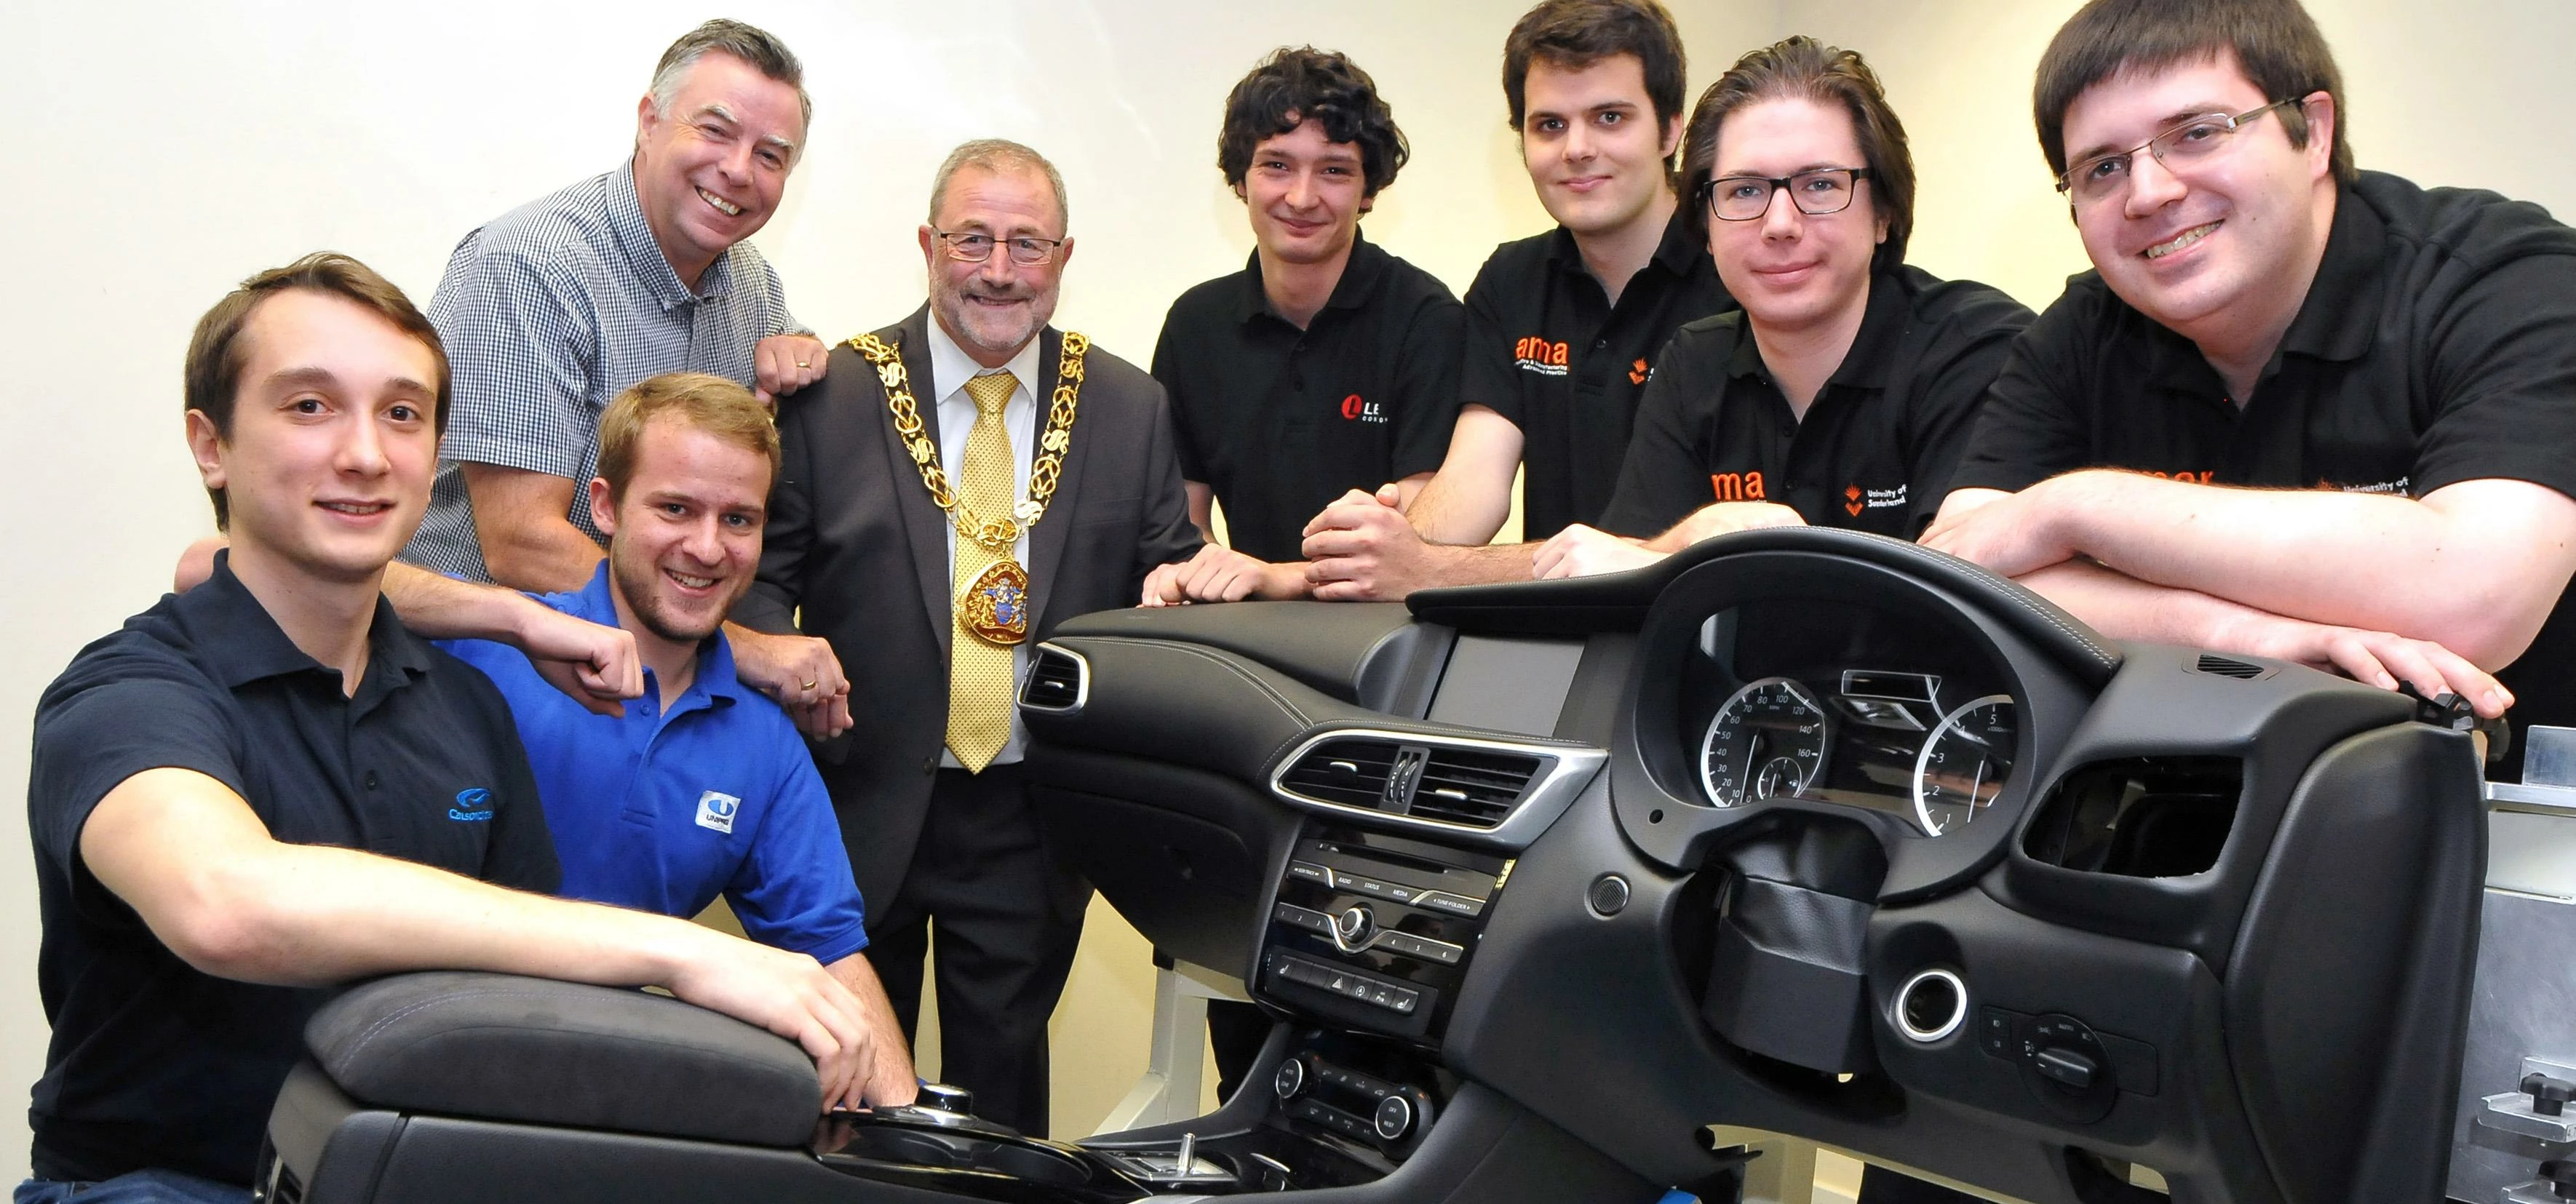 Students and businessmen with the Mayor of Sunderland